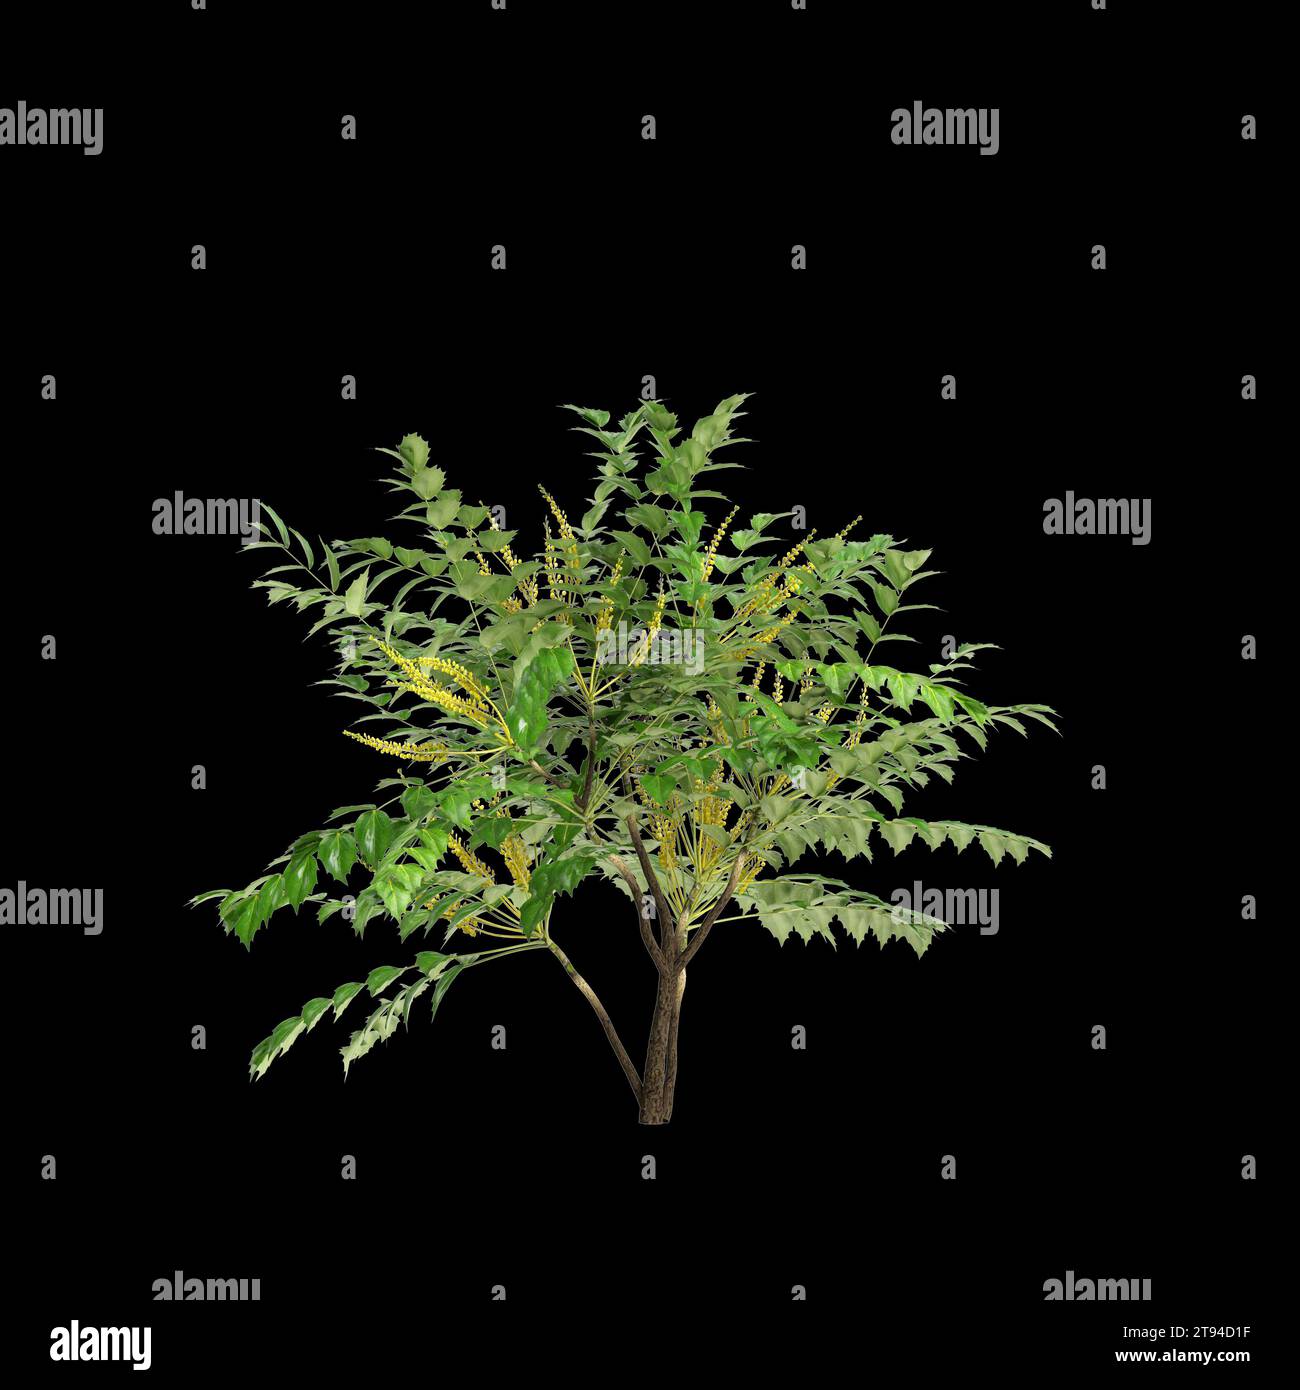 3d illustration of Mahonia japonica tree isolated on black background Stock Photo